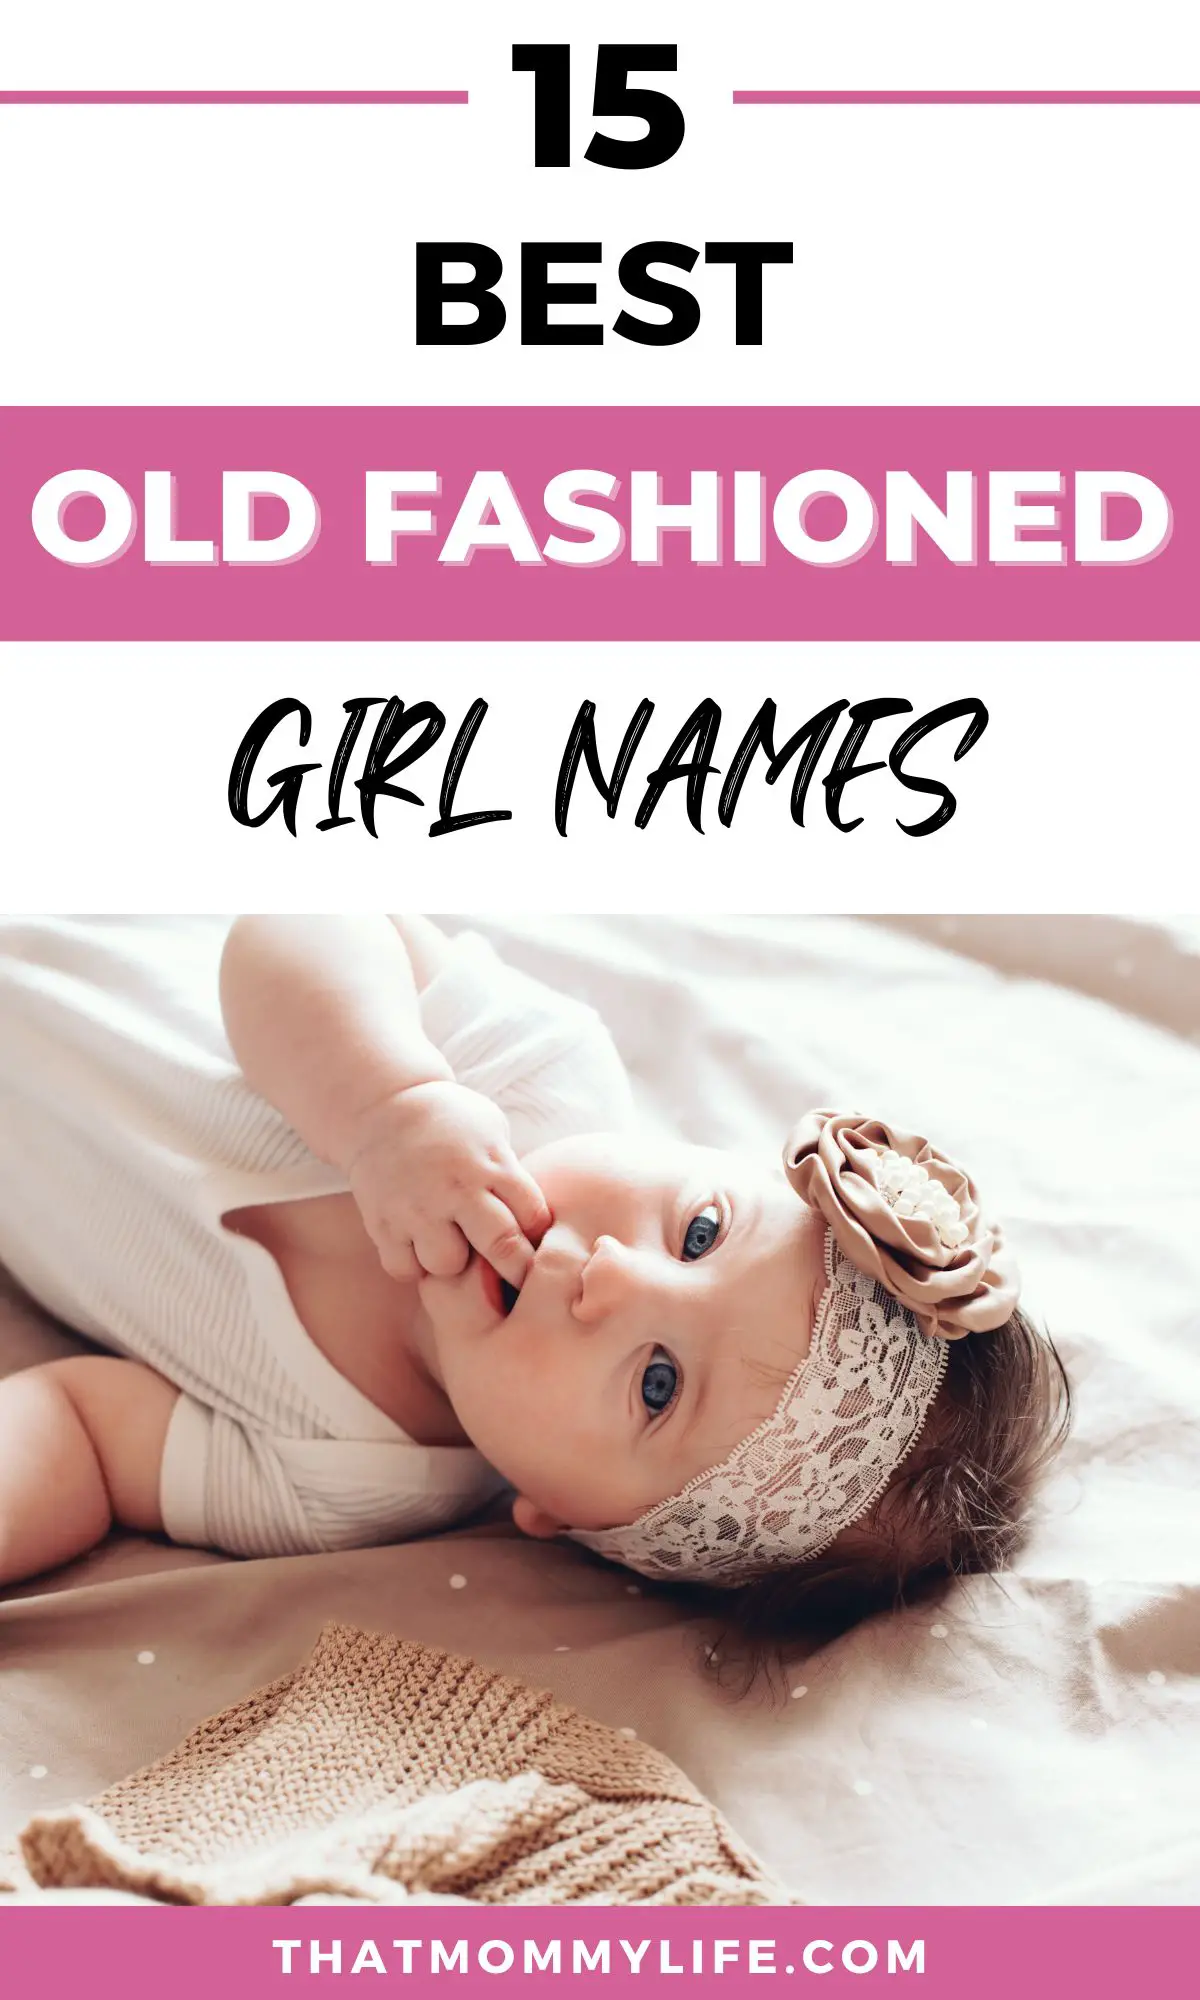 old fashioned girl names